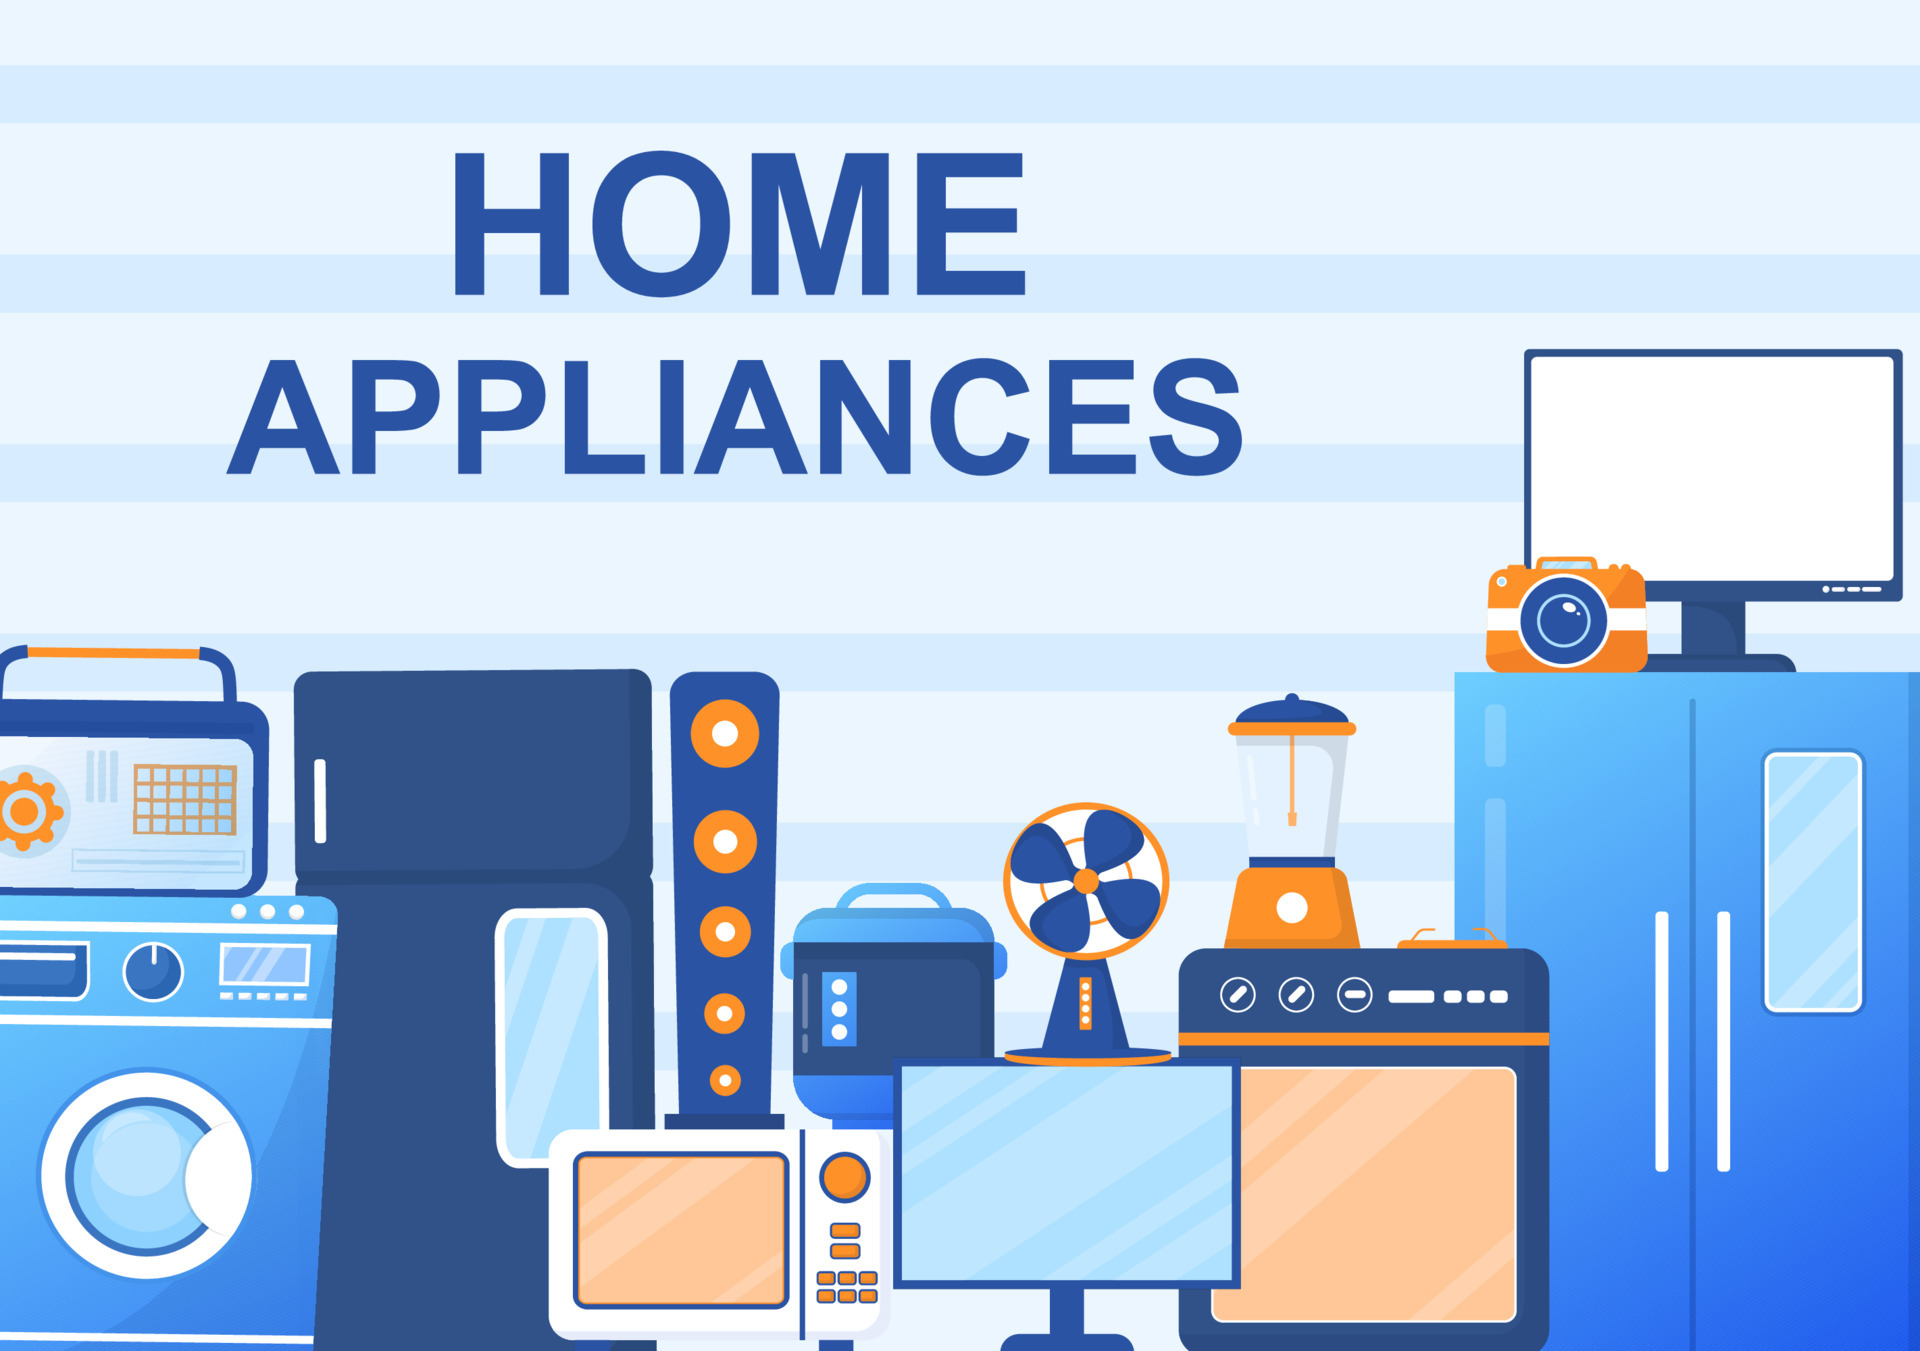 https://static.vecteezy.com/system/resources/previews/005/992/414/original/electronics-store-that-sells-computers-tv-cellphones-and-buying-home-appliance-product-in-flat-background-illustration-for-poster-or-banner-vector.jpg